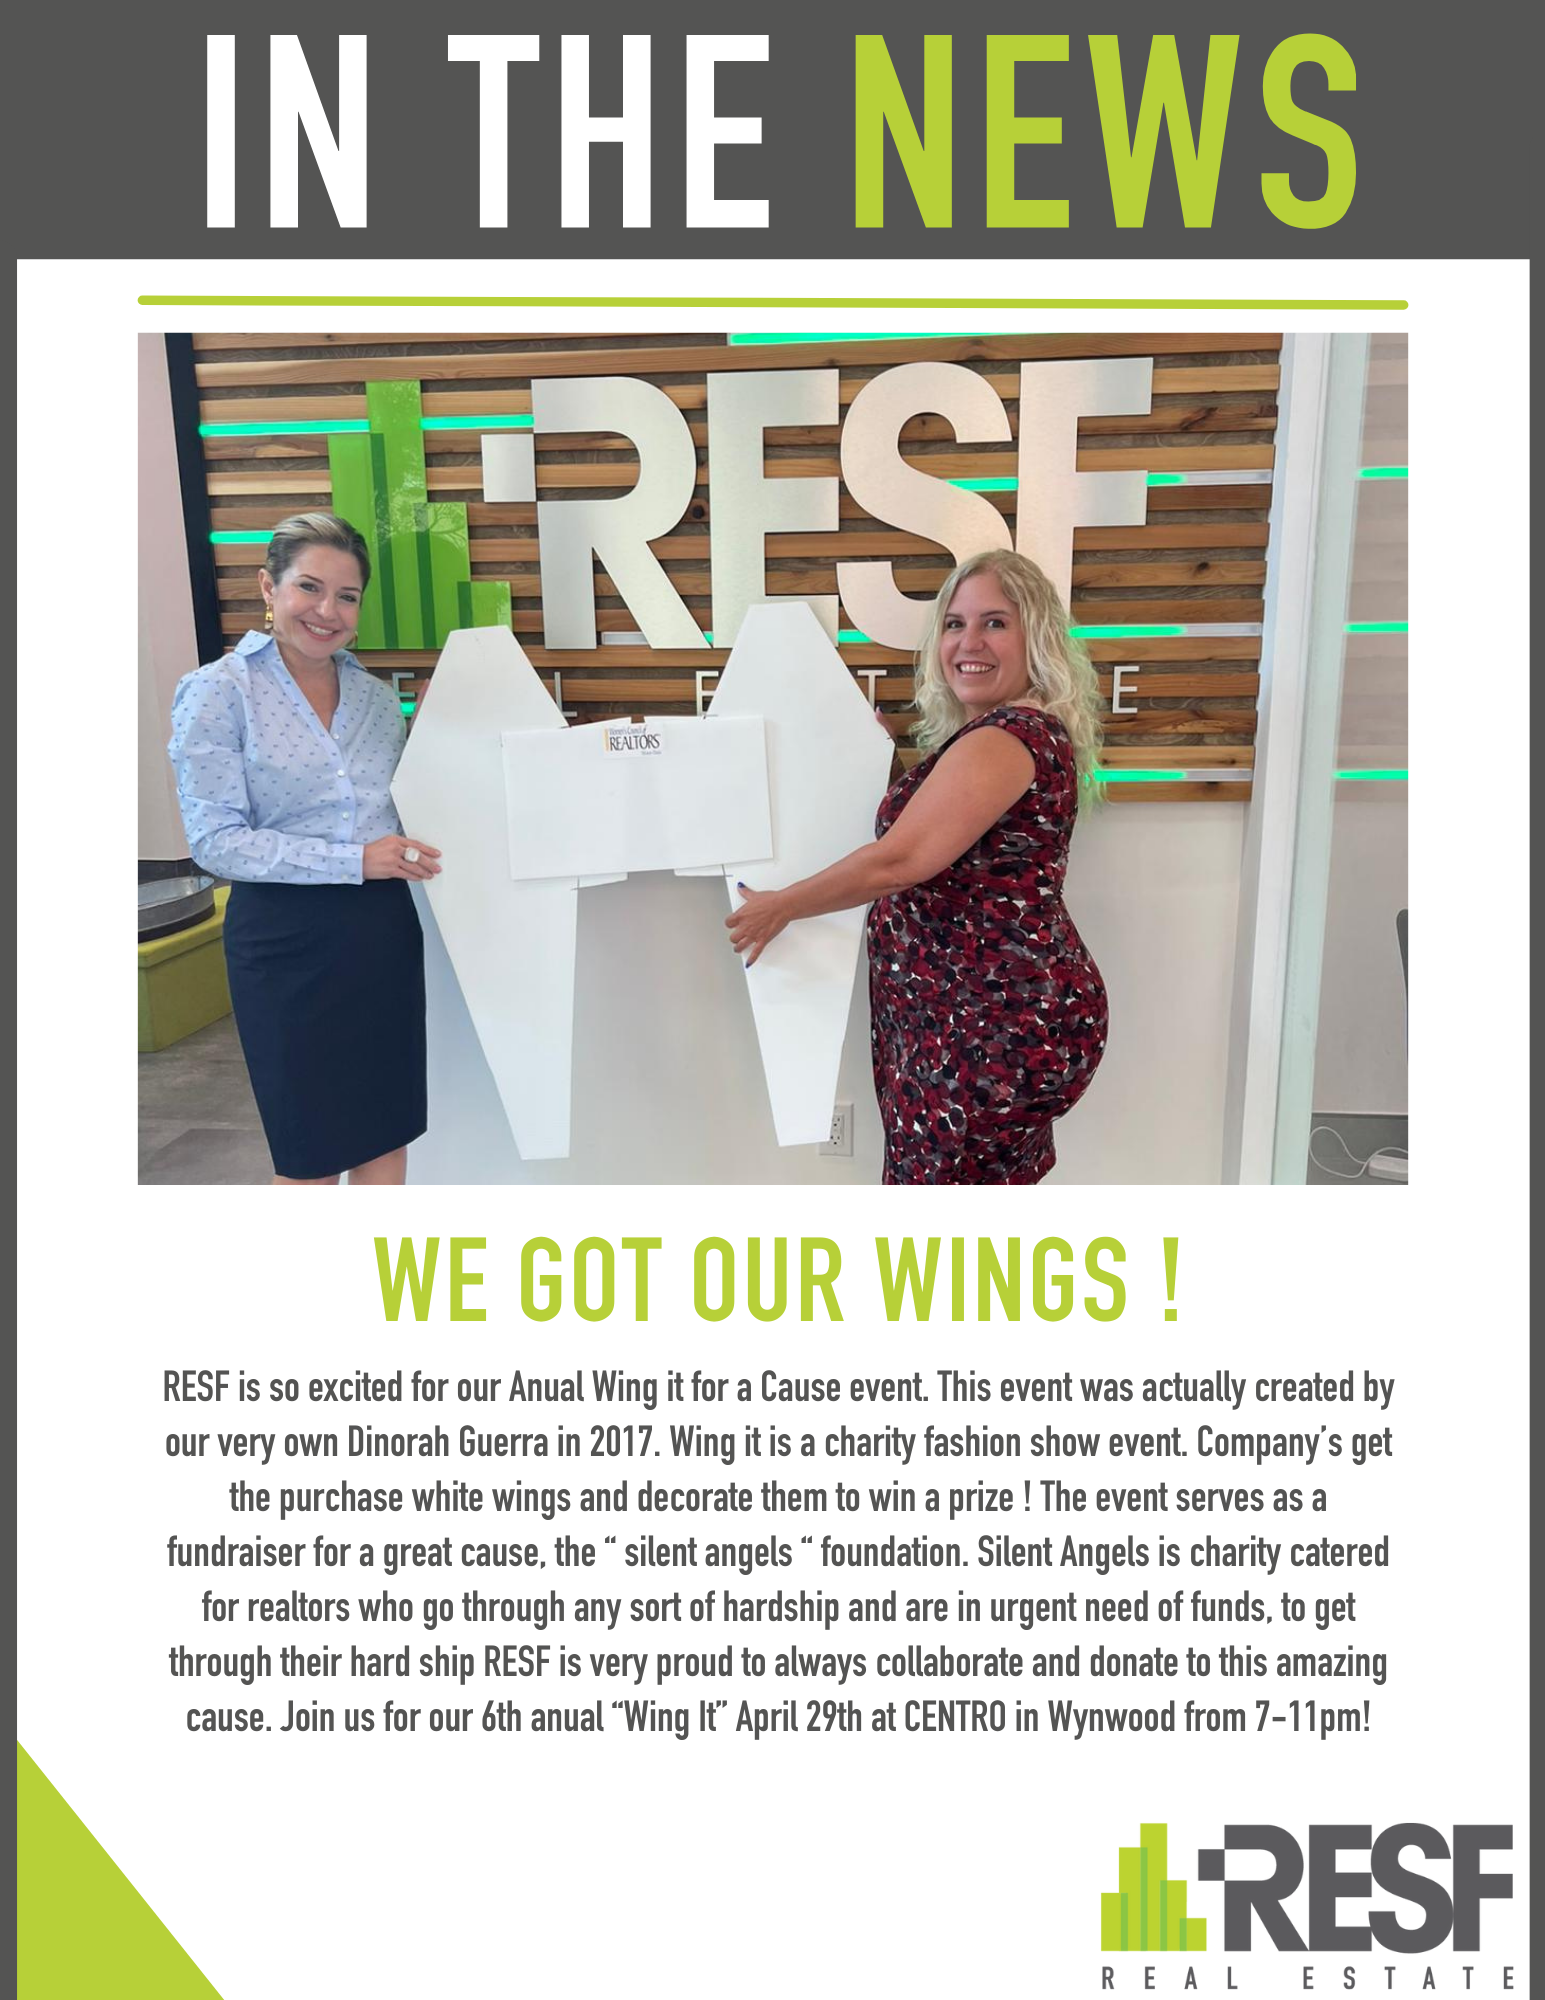 We got our wings!